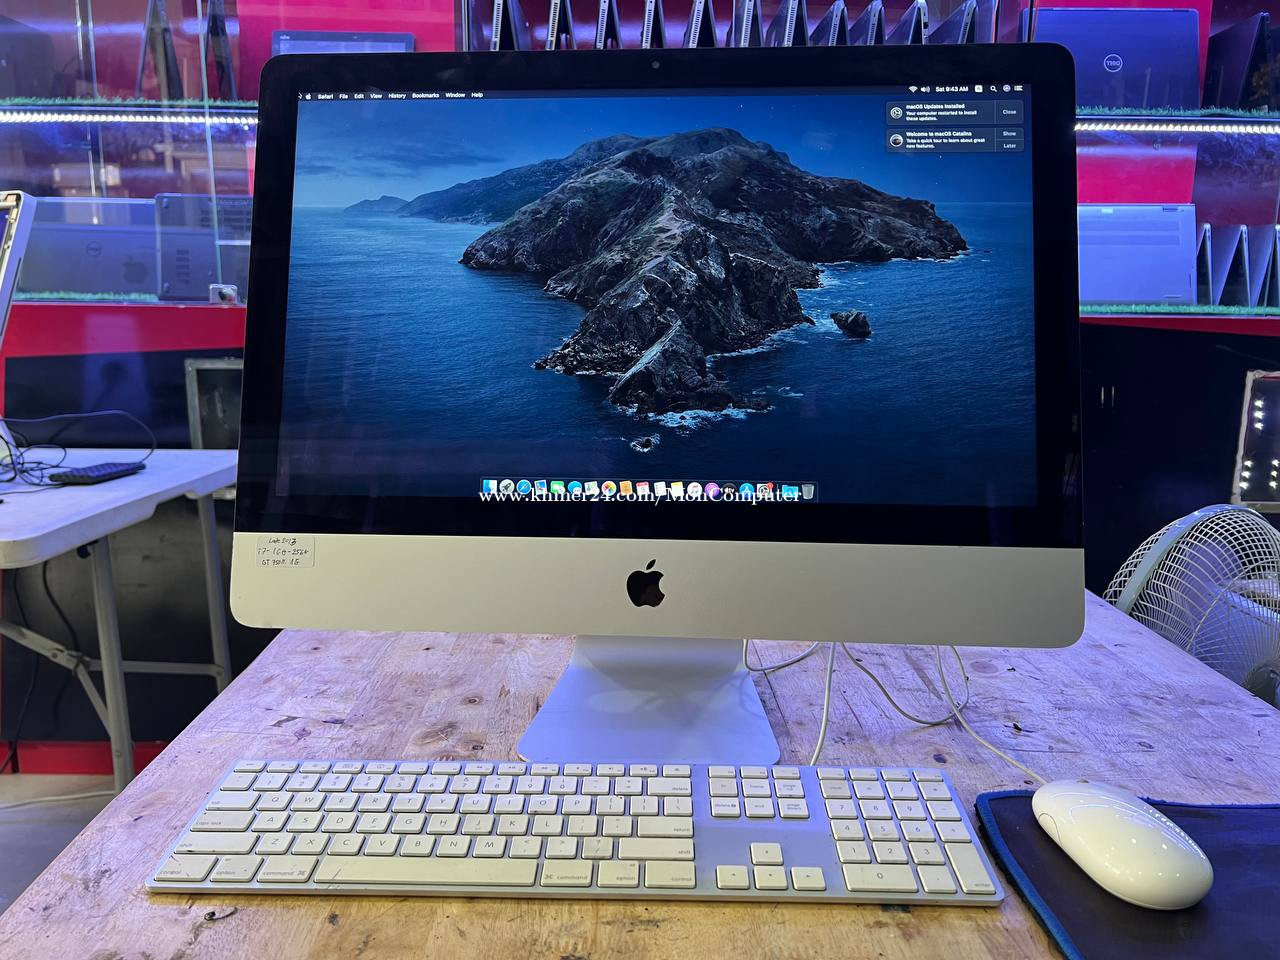 iMac 21.5inch mid 2014 FHD (Office and Design) Price $350.00 in ...